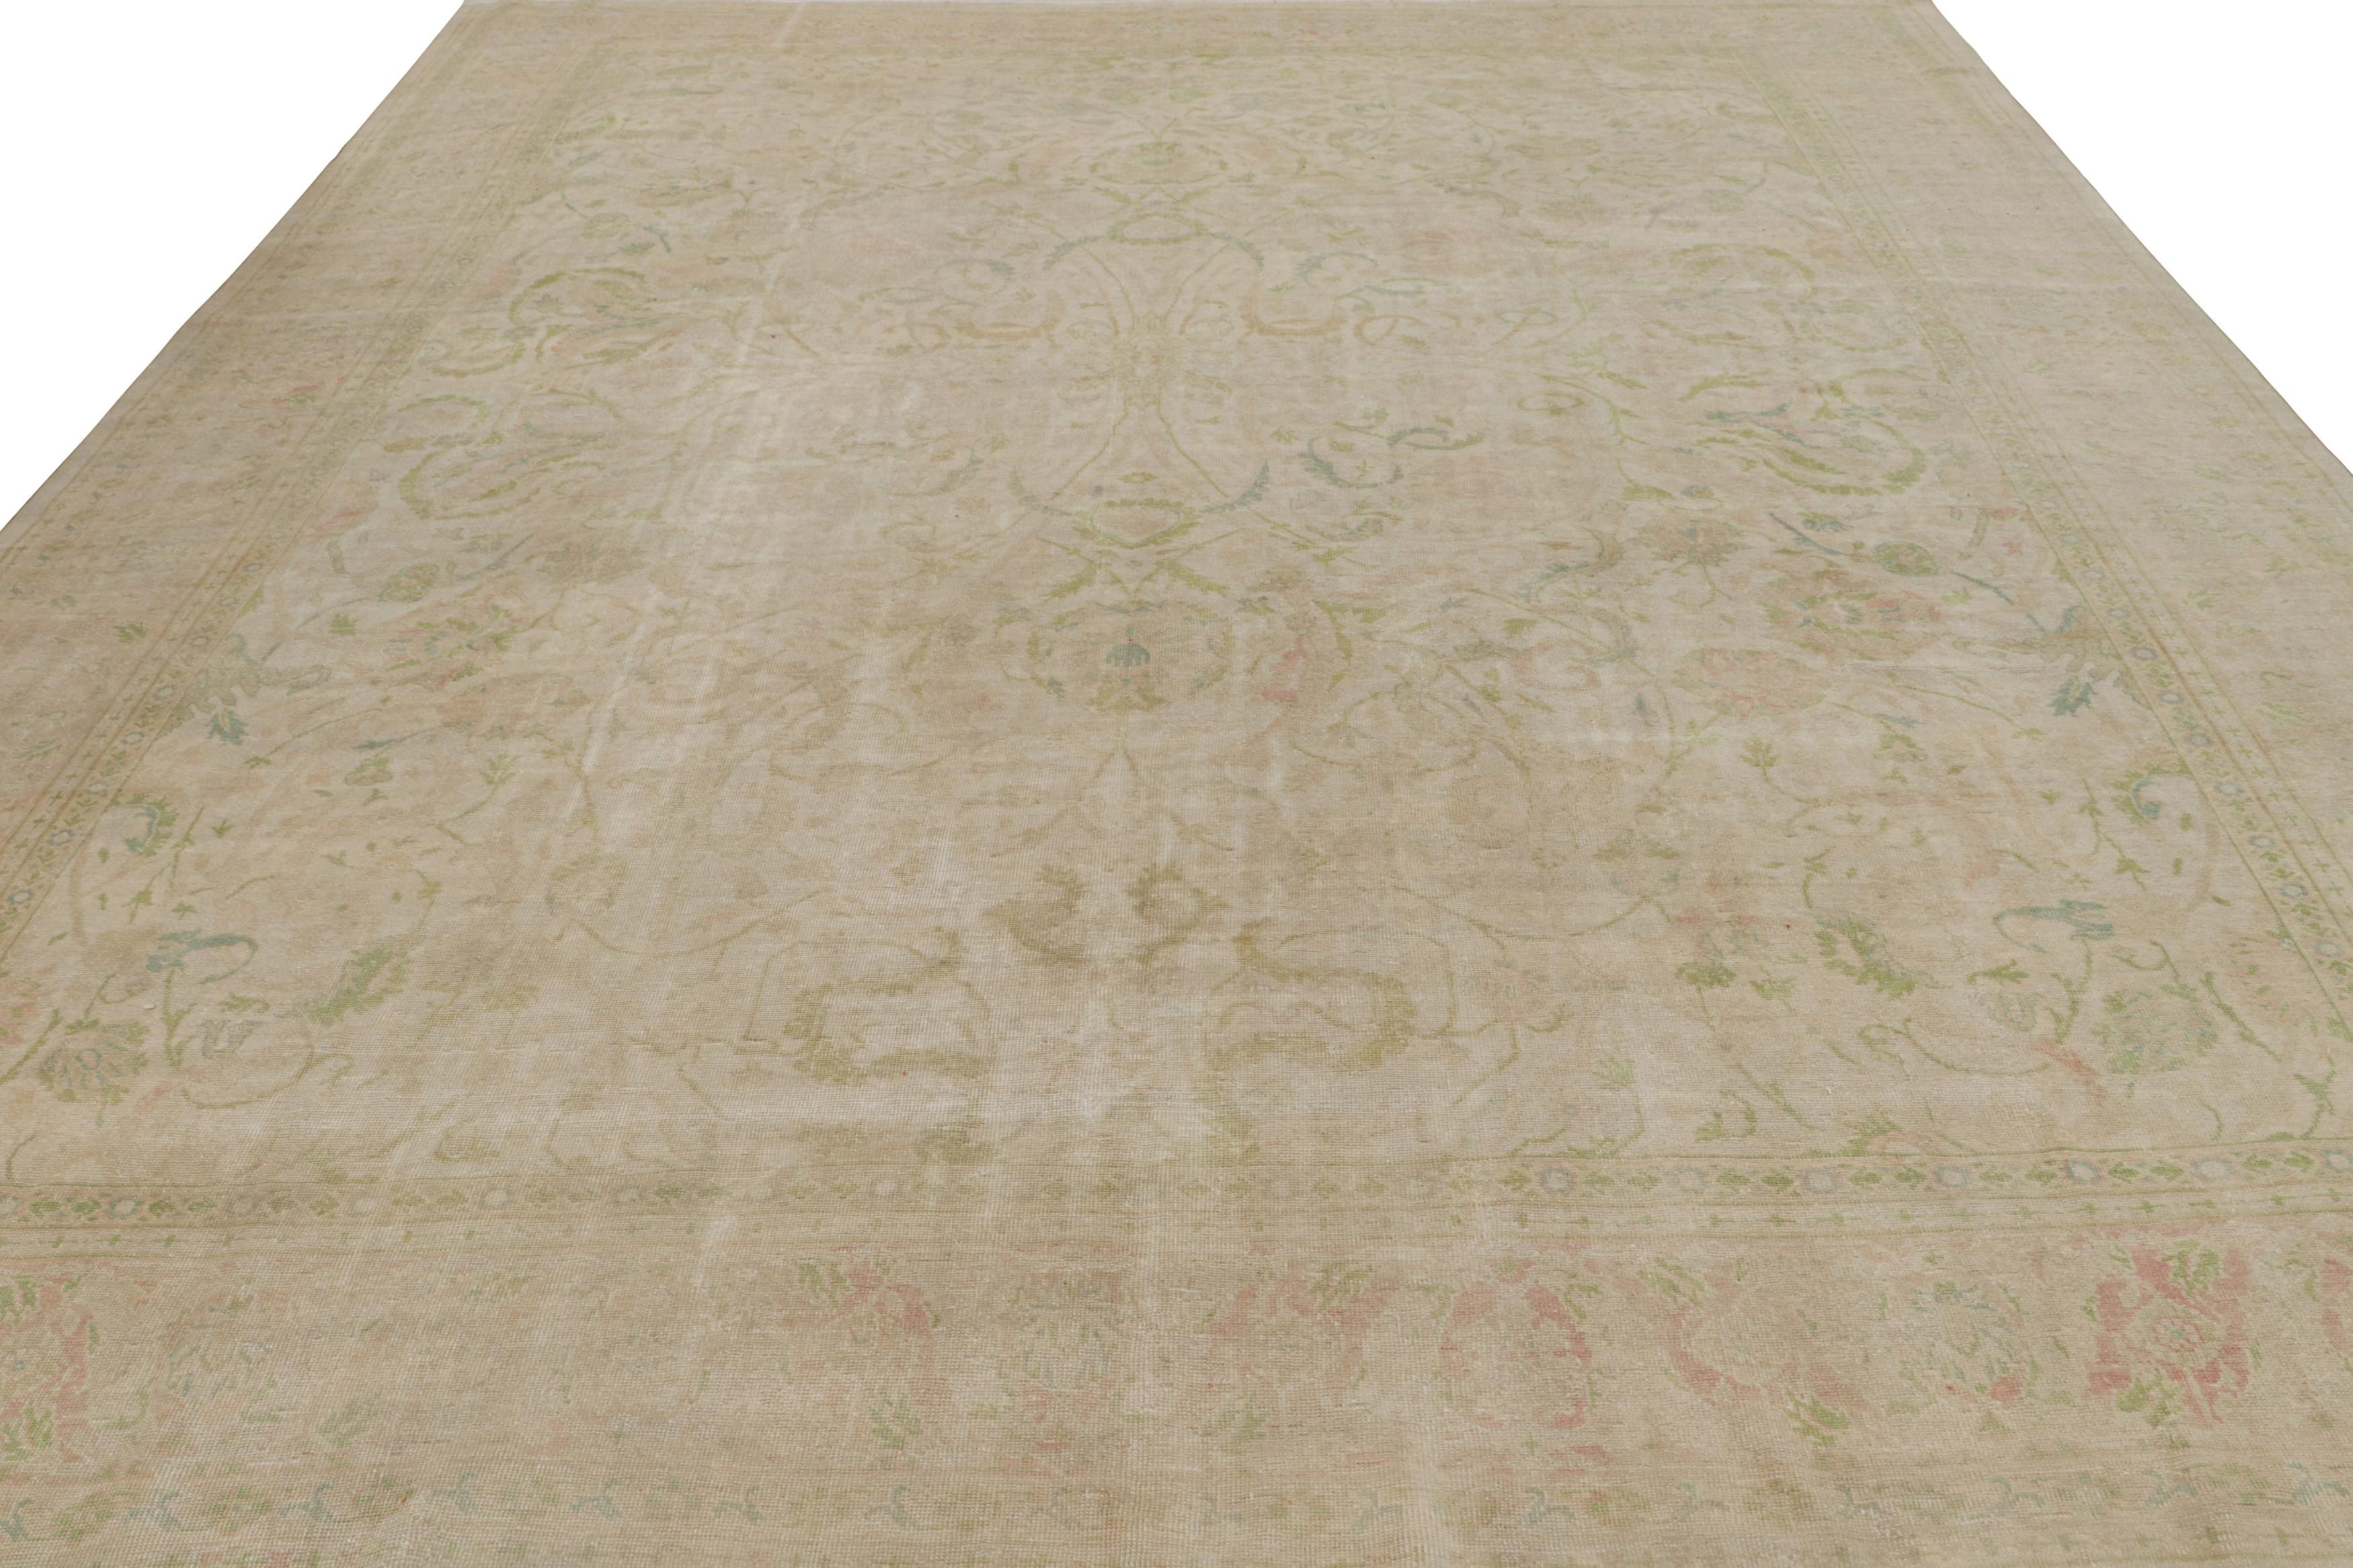 Turkish Rare Antique Sivas Rug, with Pink and Green Floral Patterns, from Rug & Kilim For Sale